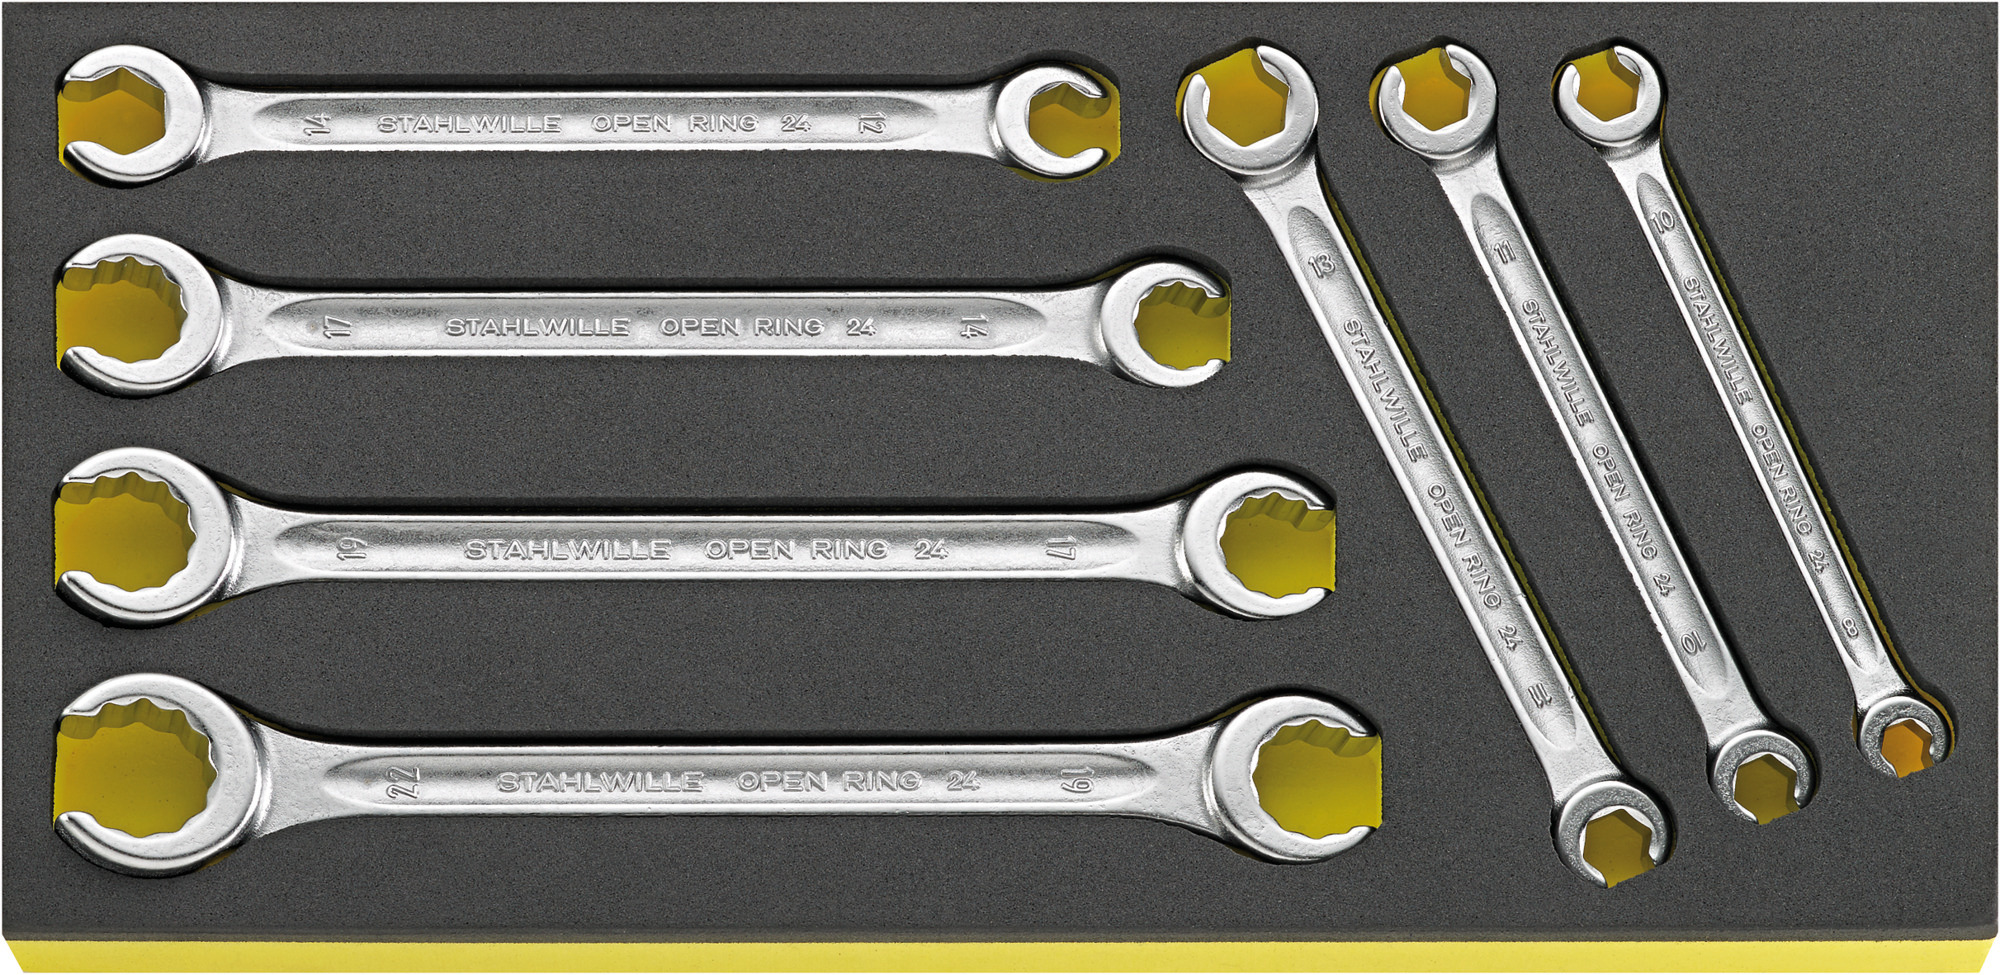 Stahlwille Double End Ring Spanner Set 10x11mm-18x19mm – Lyto